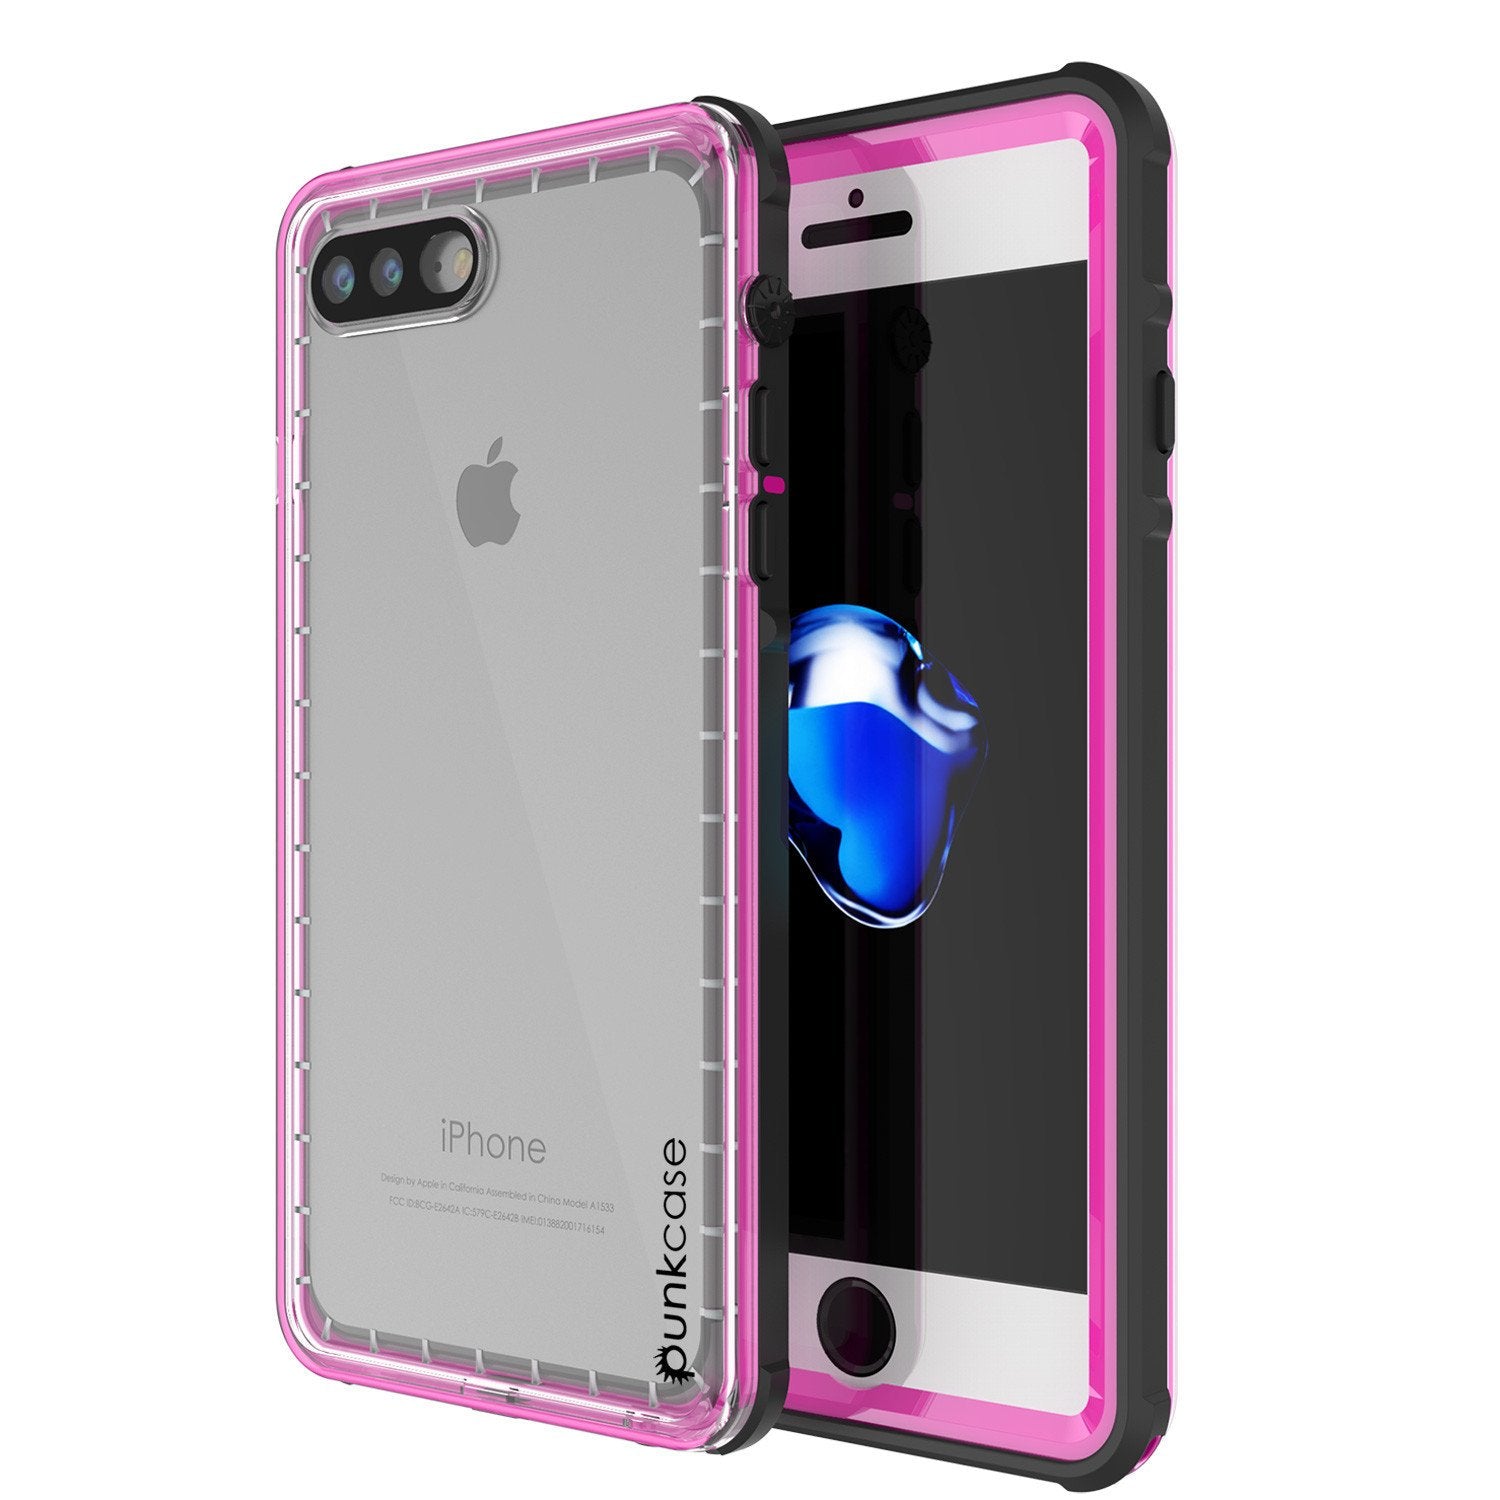 iPhone 7+ Plus Waterproof Case, PUNKcase CRYSTAL Pink W/ Attached Screen Protector  | Warranty